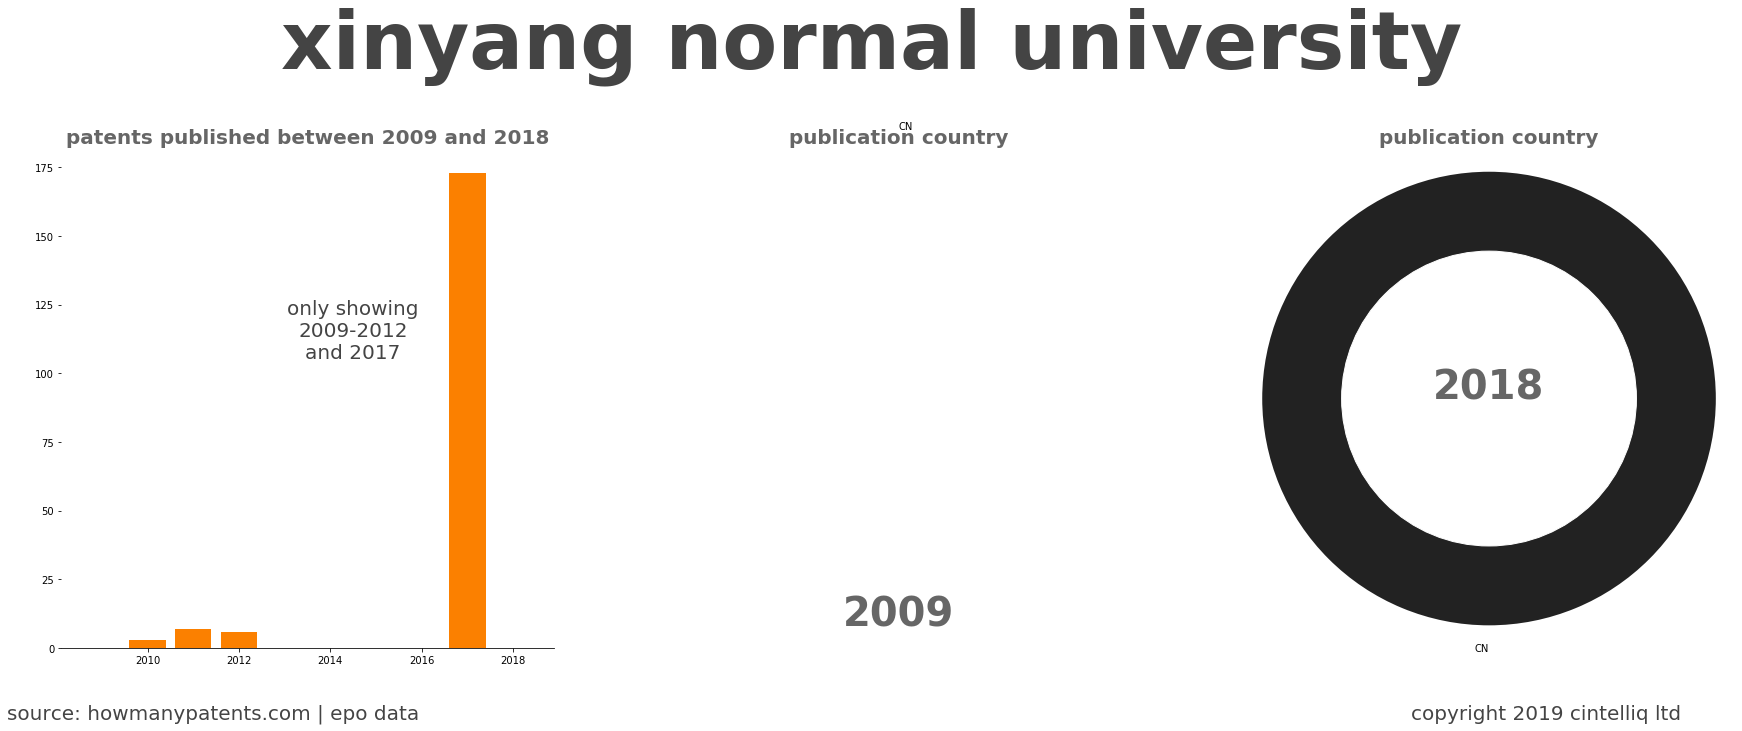 summary of patents for Xinyang Normal University